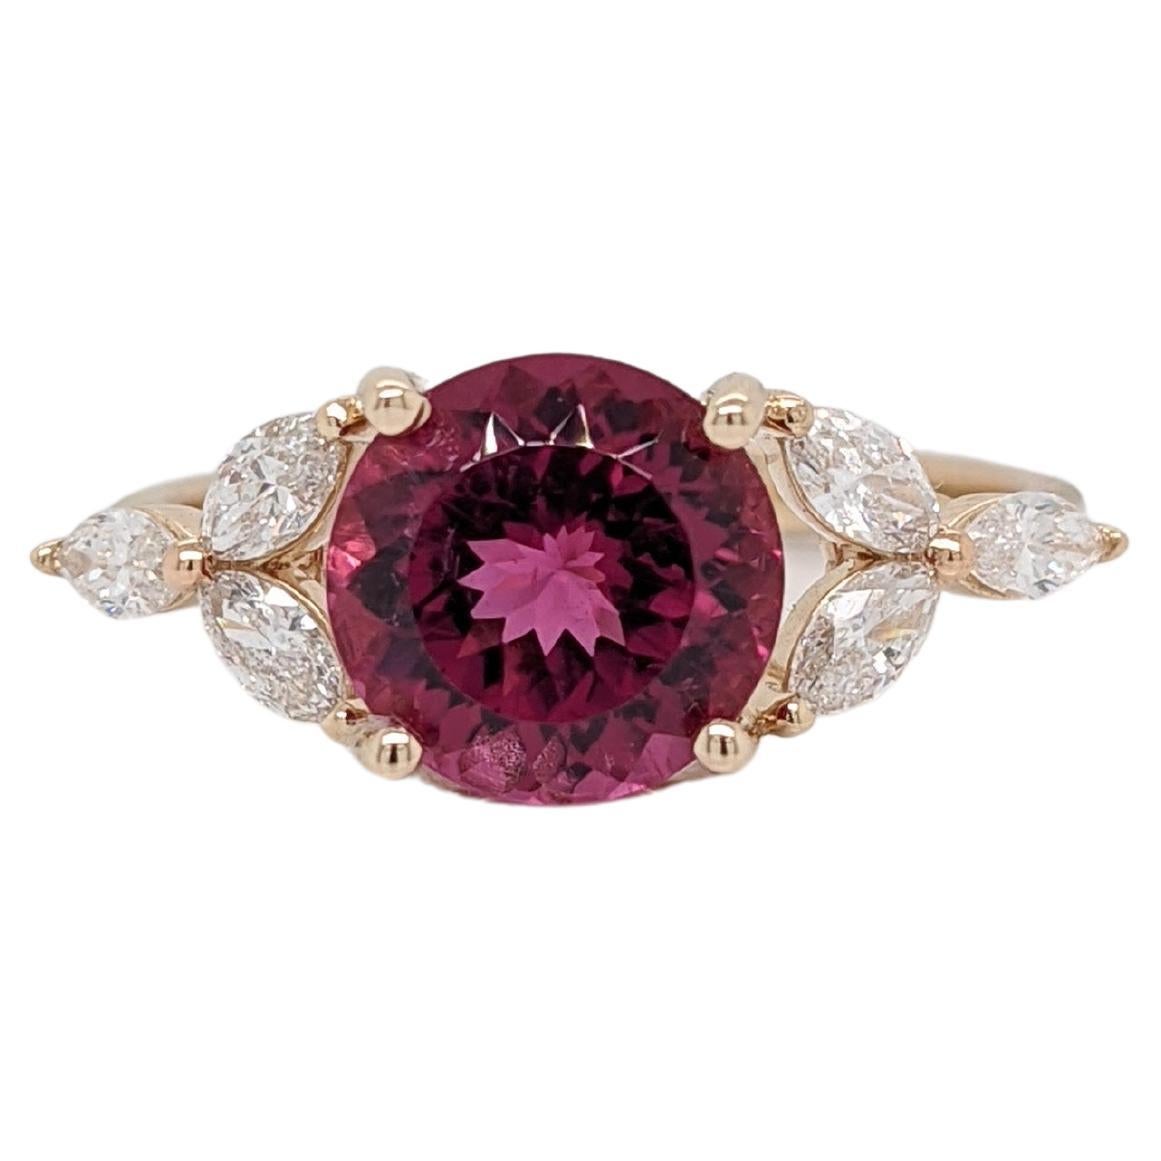 2.25 carat Rubellite Tourmaline in 14k Yellow Gold w Diamond Accents Round 8mm For Sale